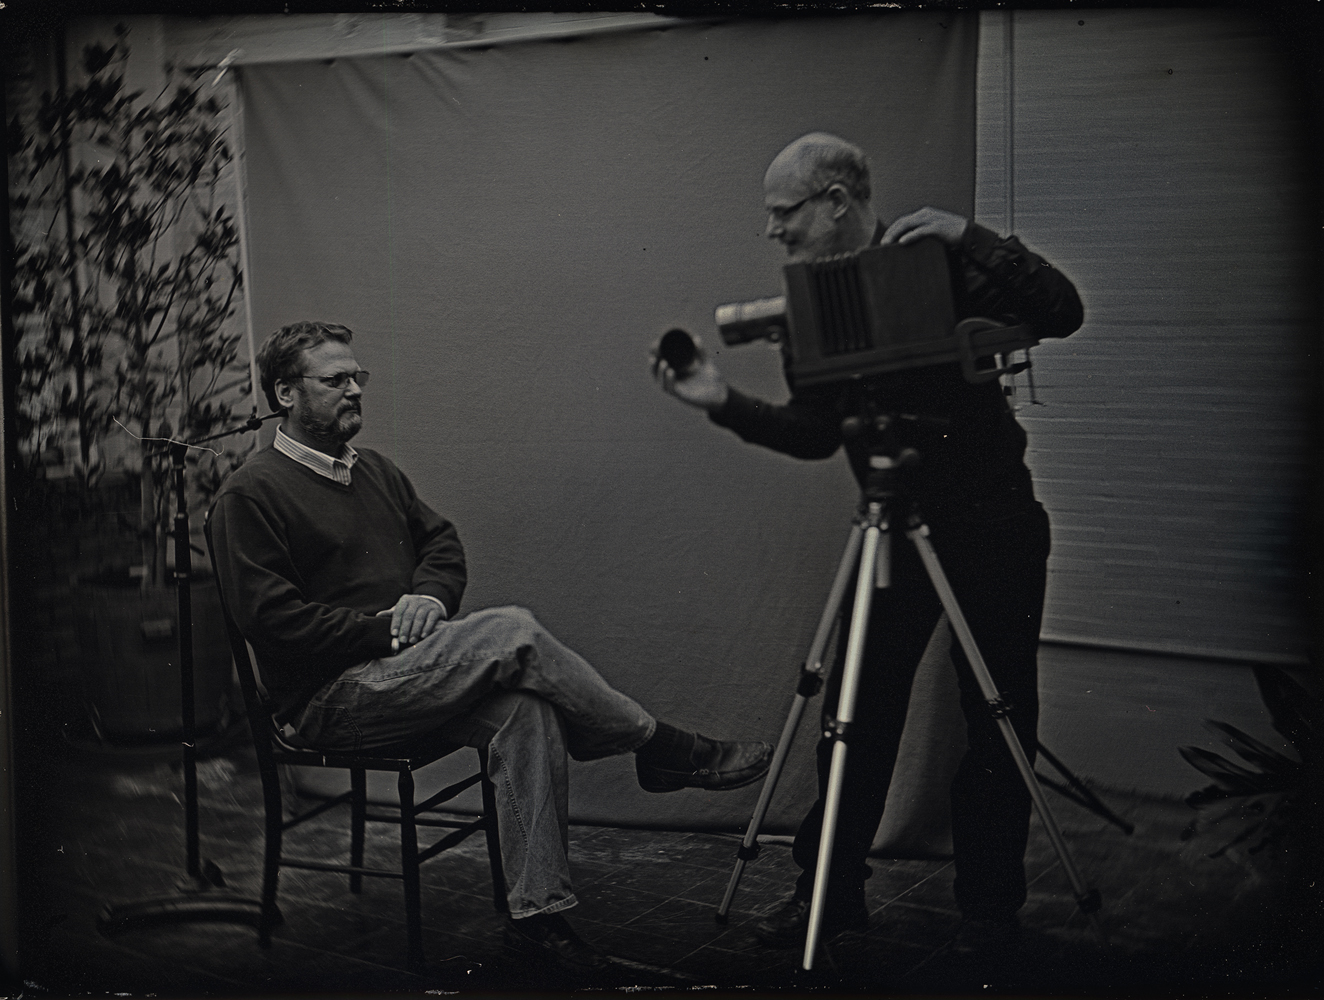 Daniel Carrillo, Mike Robinson and Mark Osterman, 2012, daguerreotype, 3.25 x 4.25 inches, $1800